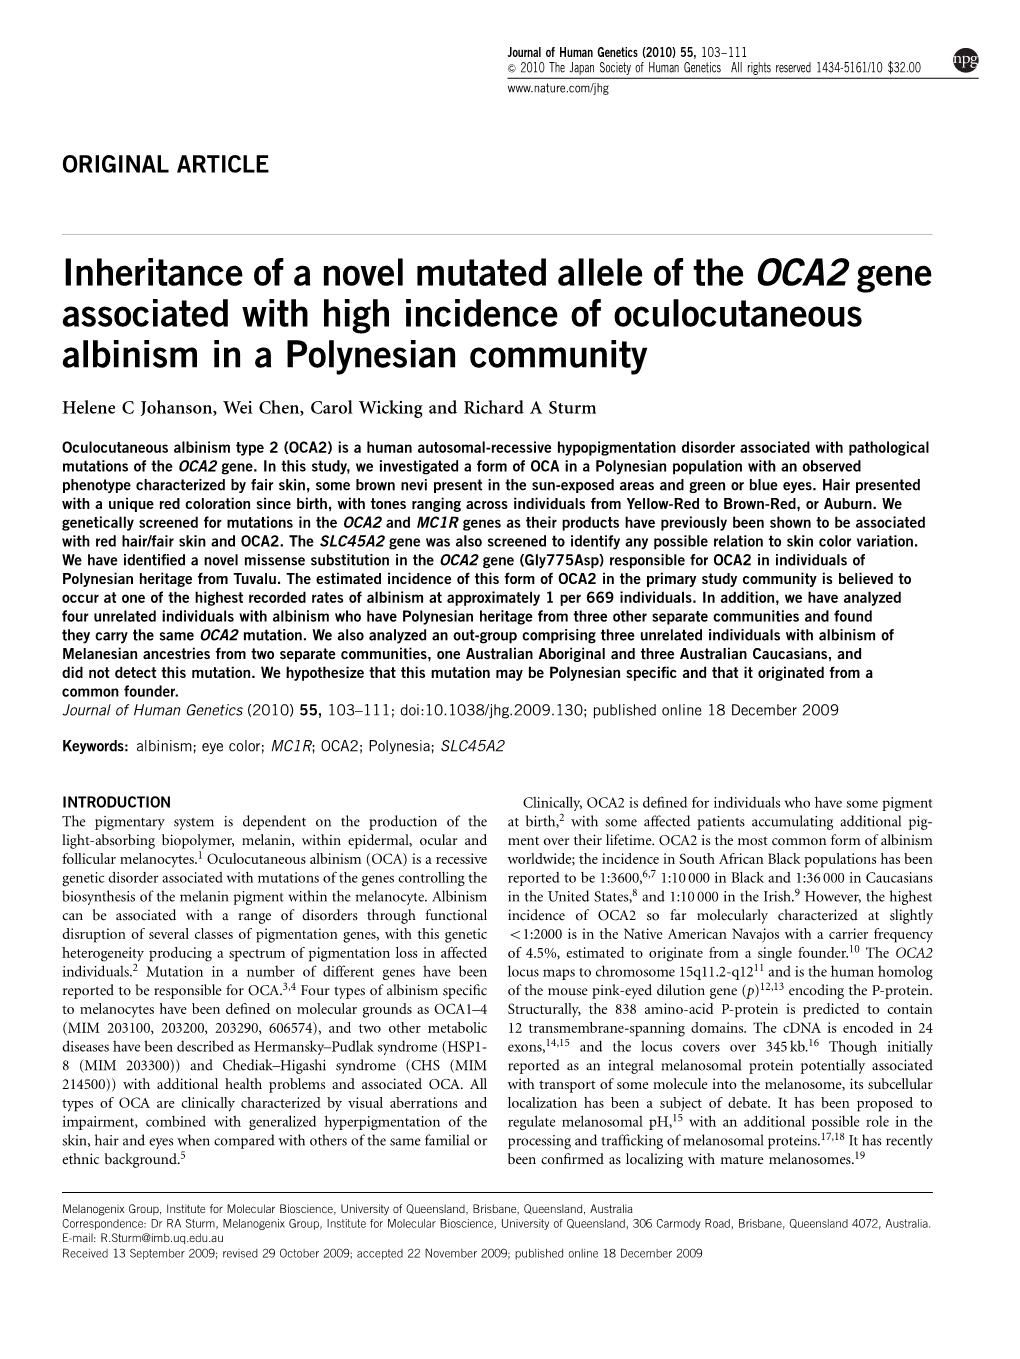 Inheritance of a Novel Mutated Allele of the OCA2 Gene Associated with High Incidence of Oculocutaneous Albinism in a Polynesian Community